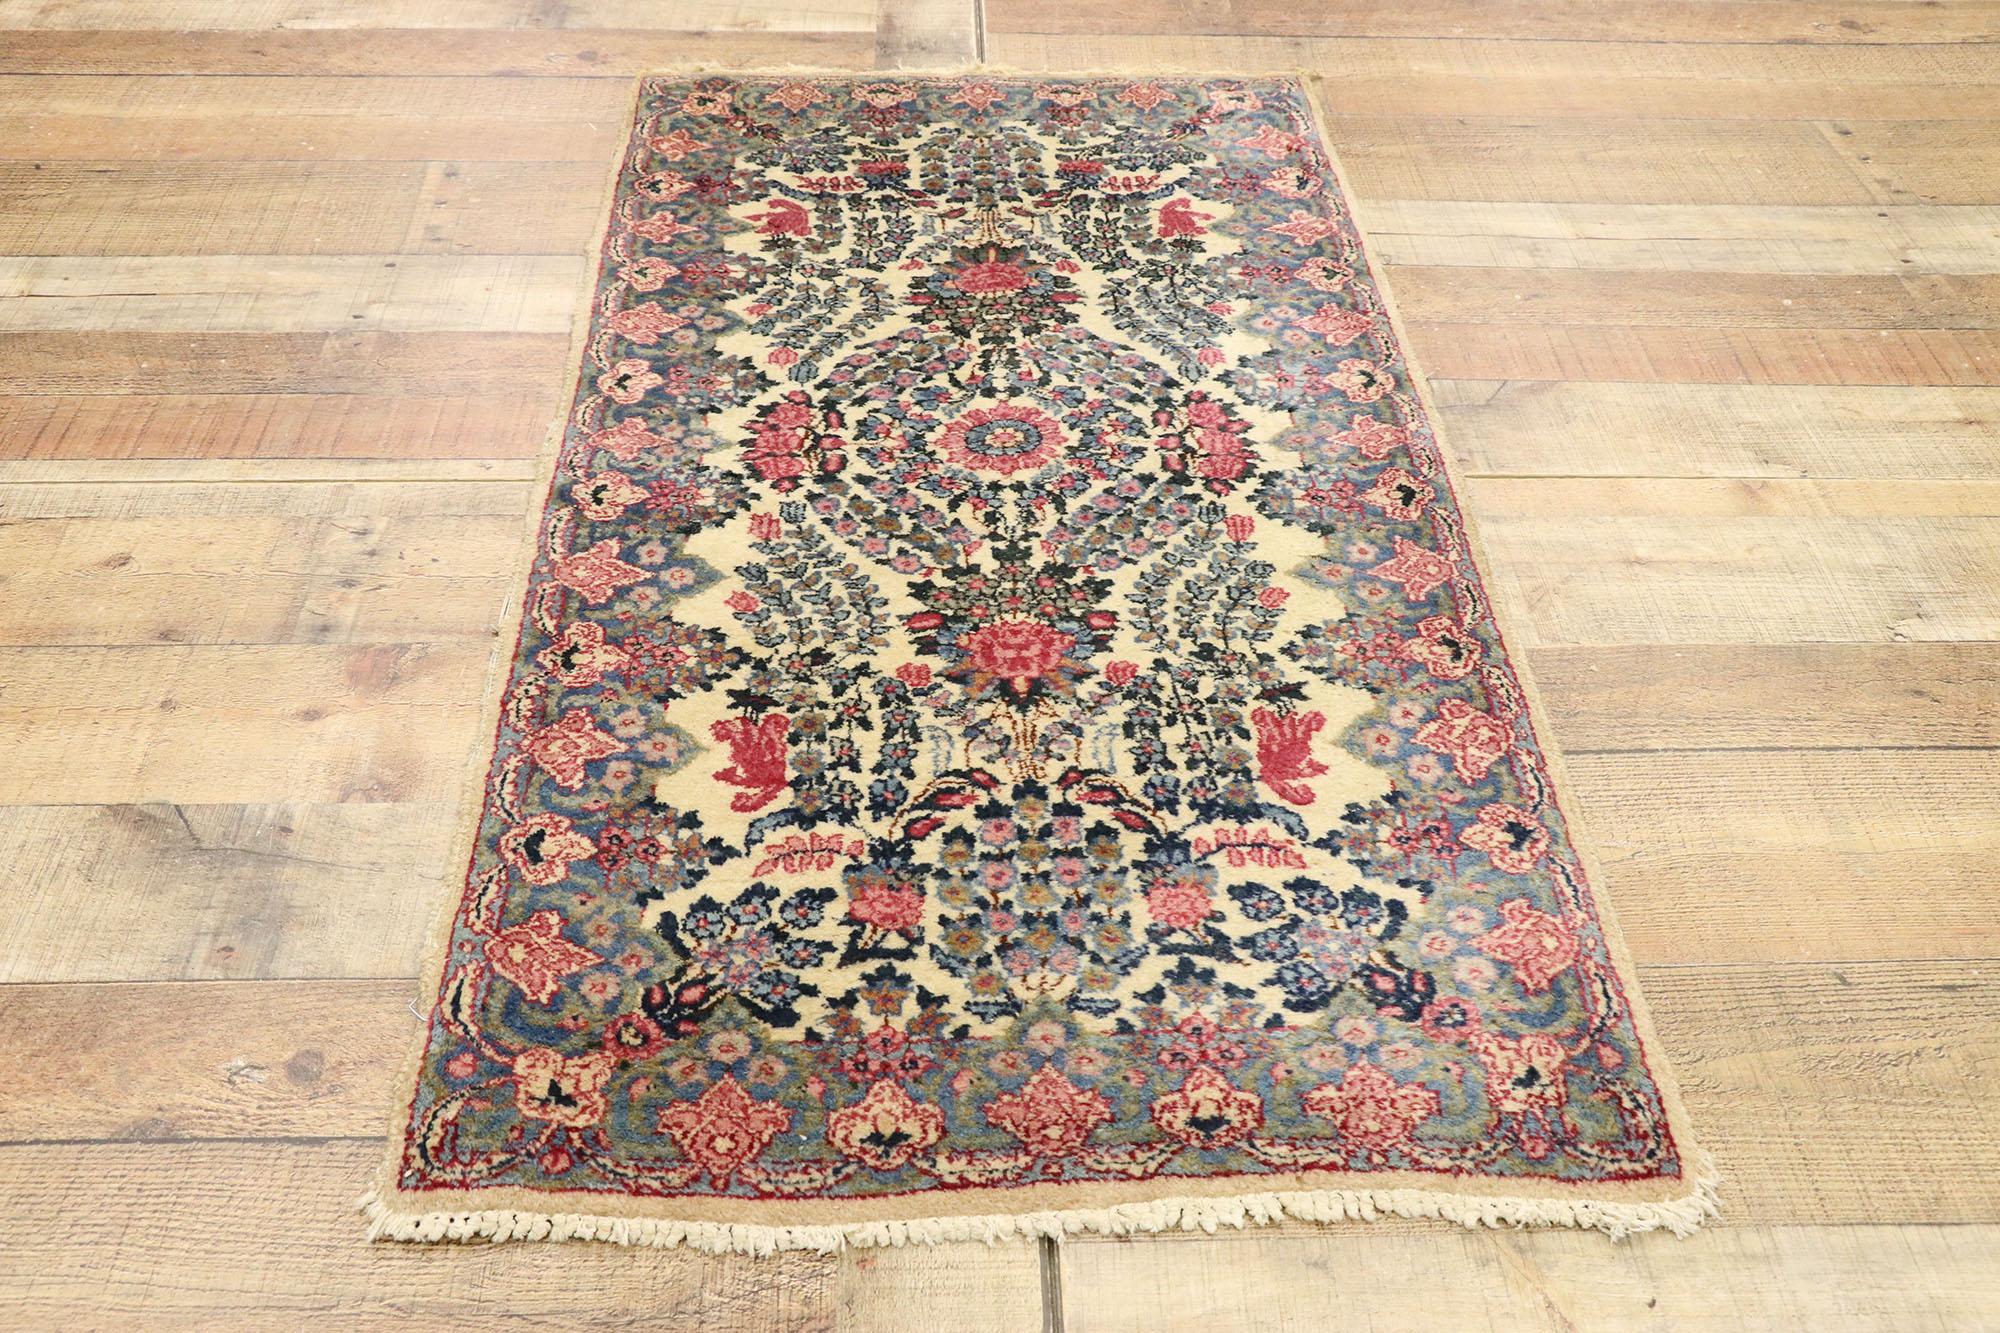 Wool Antique Persian Kerman Scatter Rug with Traditional French Rococo Style